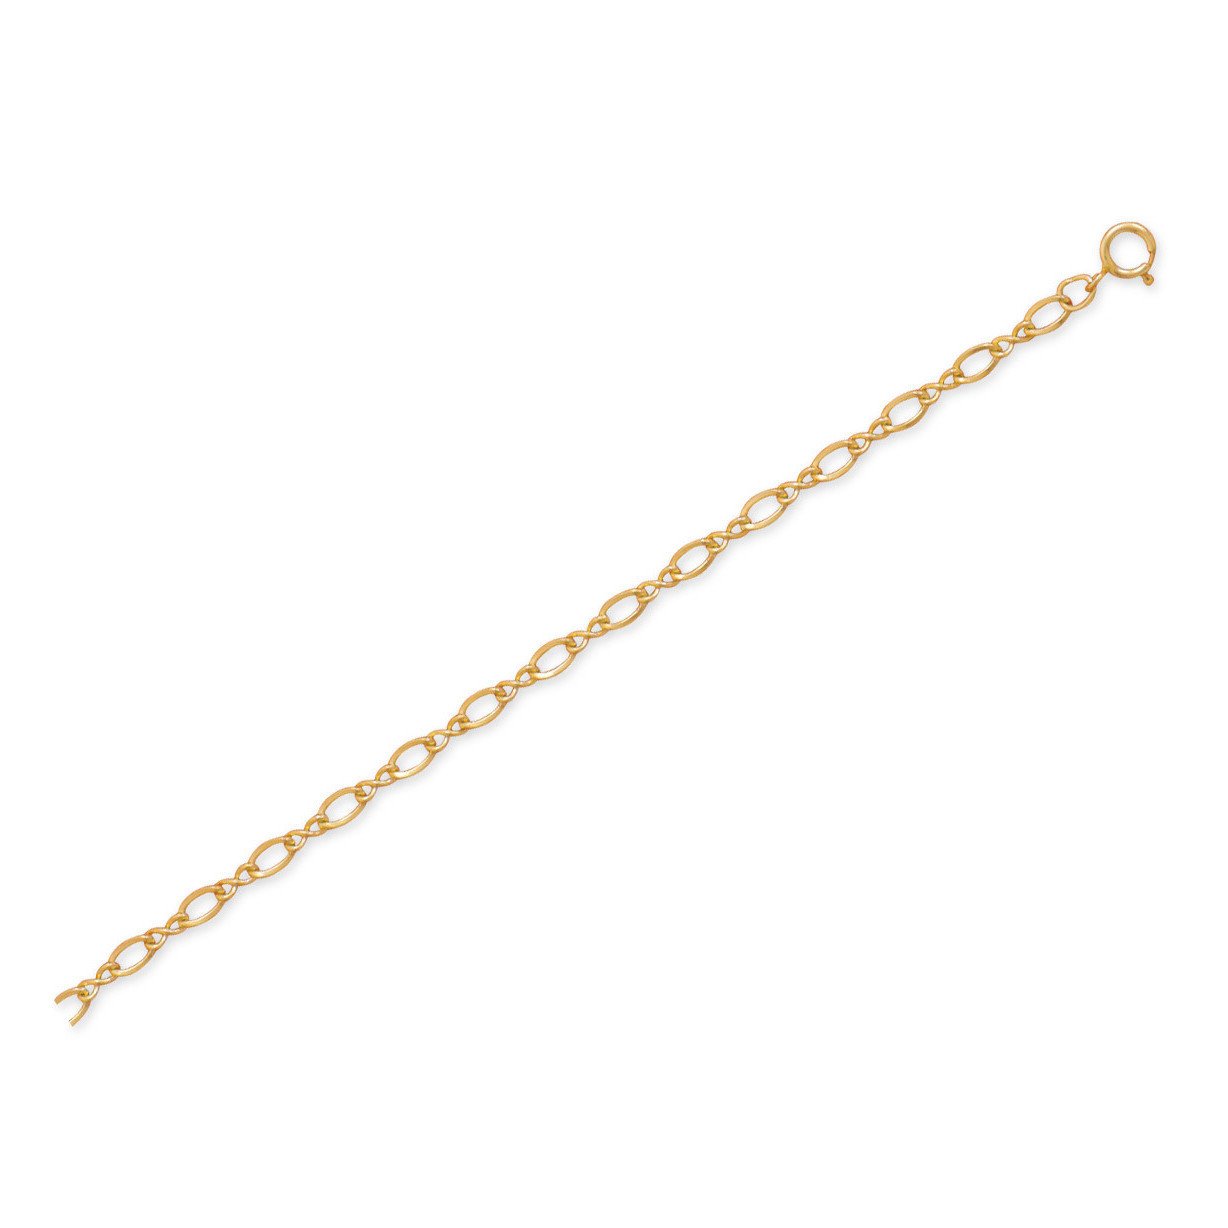 14/20 Gold Filled 3 mm Figure 8 Chain Anklet